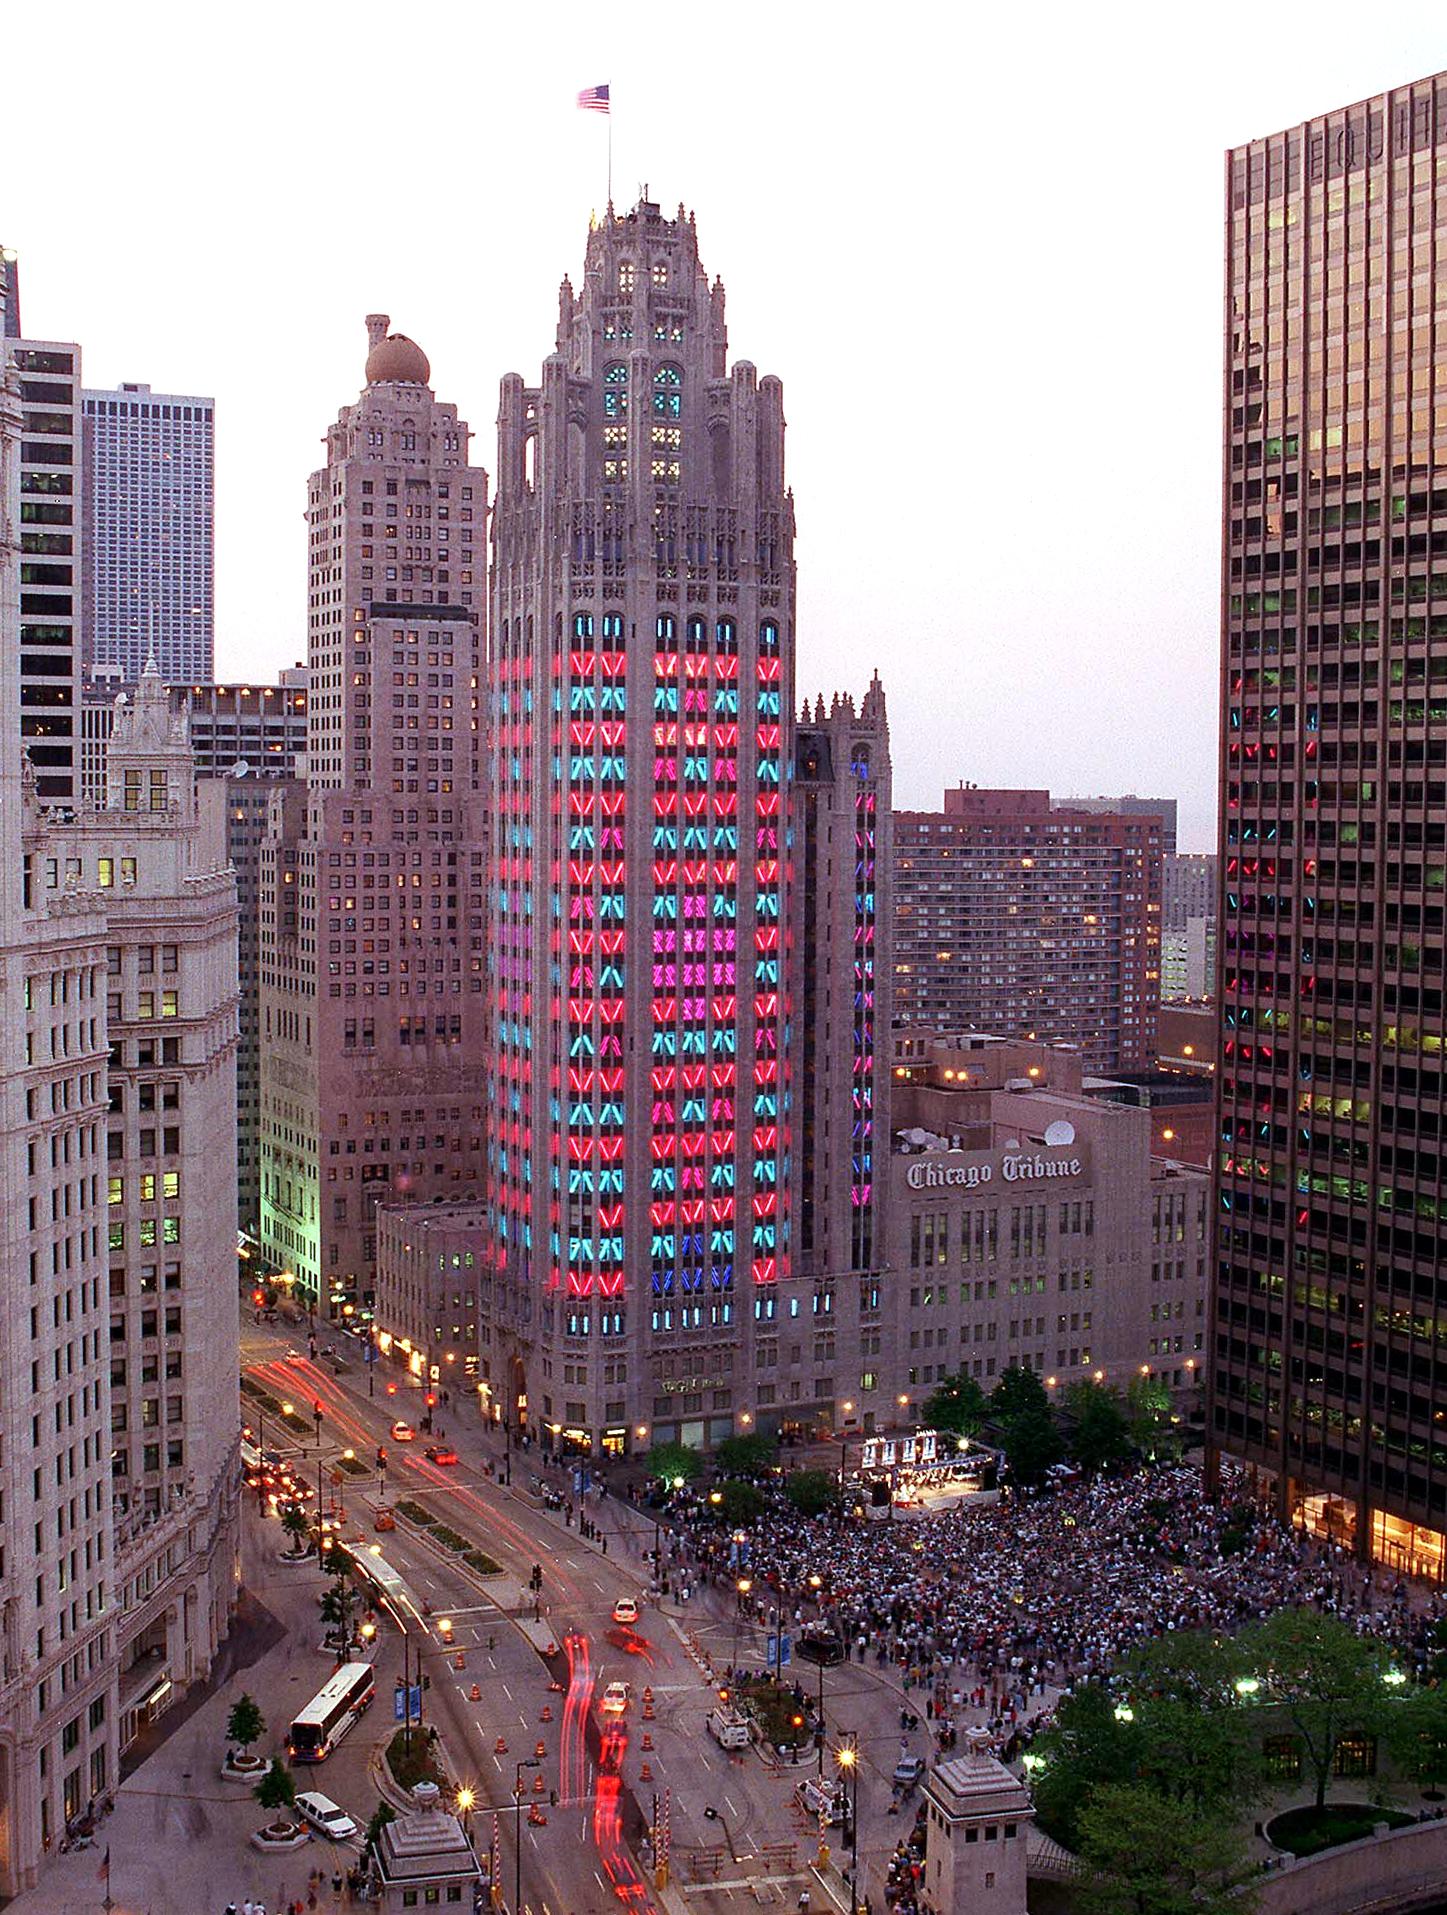 (FILES) This 10 June 1997 file photo shows the Chicago Tribune building decorated for the 150th anniversary celebration of the newspaper. It was announced 13 March 2000 by The Times Mirror Company, publisher of the Los Angeles Times and other US newspapers, that it is being purchased by the Tribune Company in a deal reported to be worth USD six billion. The agreement will create the third largest US newspaper company. The Tribune Company is also involved in some two dozen other media properties including television and radio broadcasting, publishing, education and interactive ventures. AFP PHOTO/CHARLES CHERNEY/CHICAGO TRIBUNE